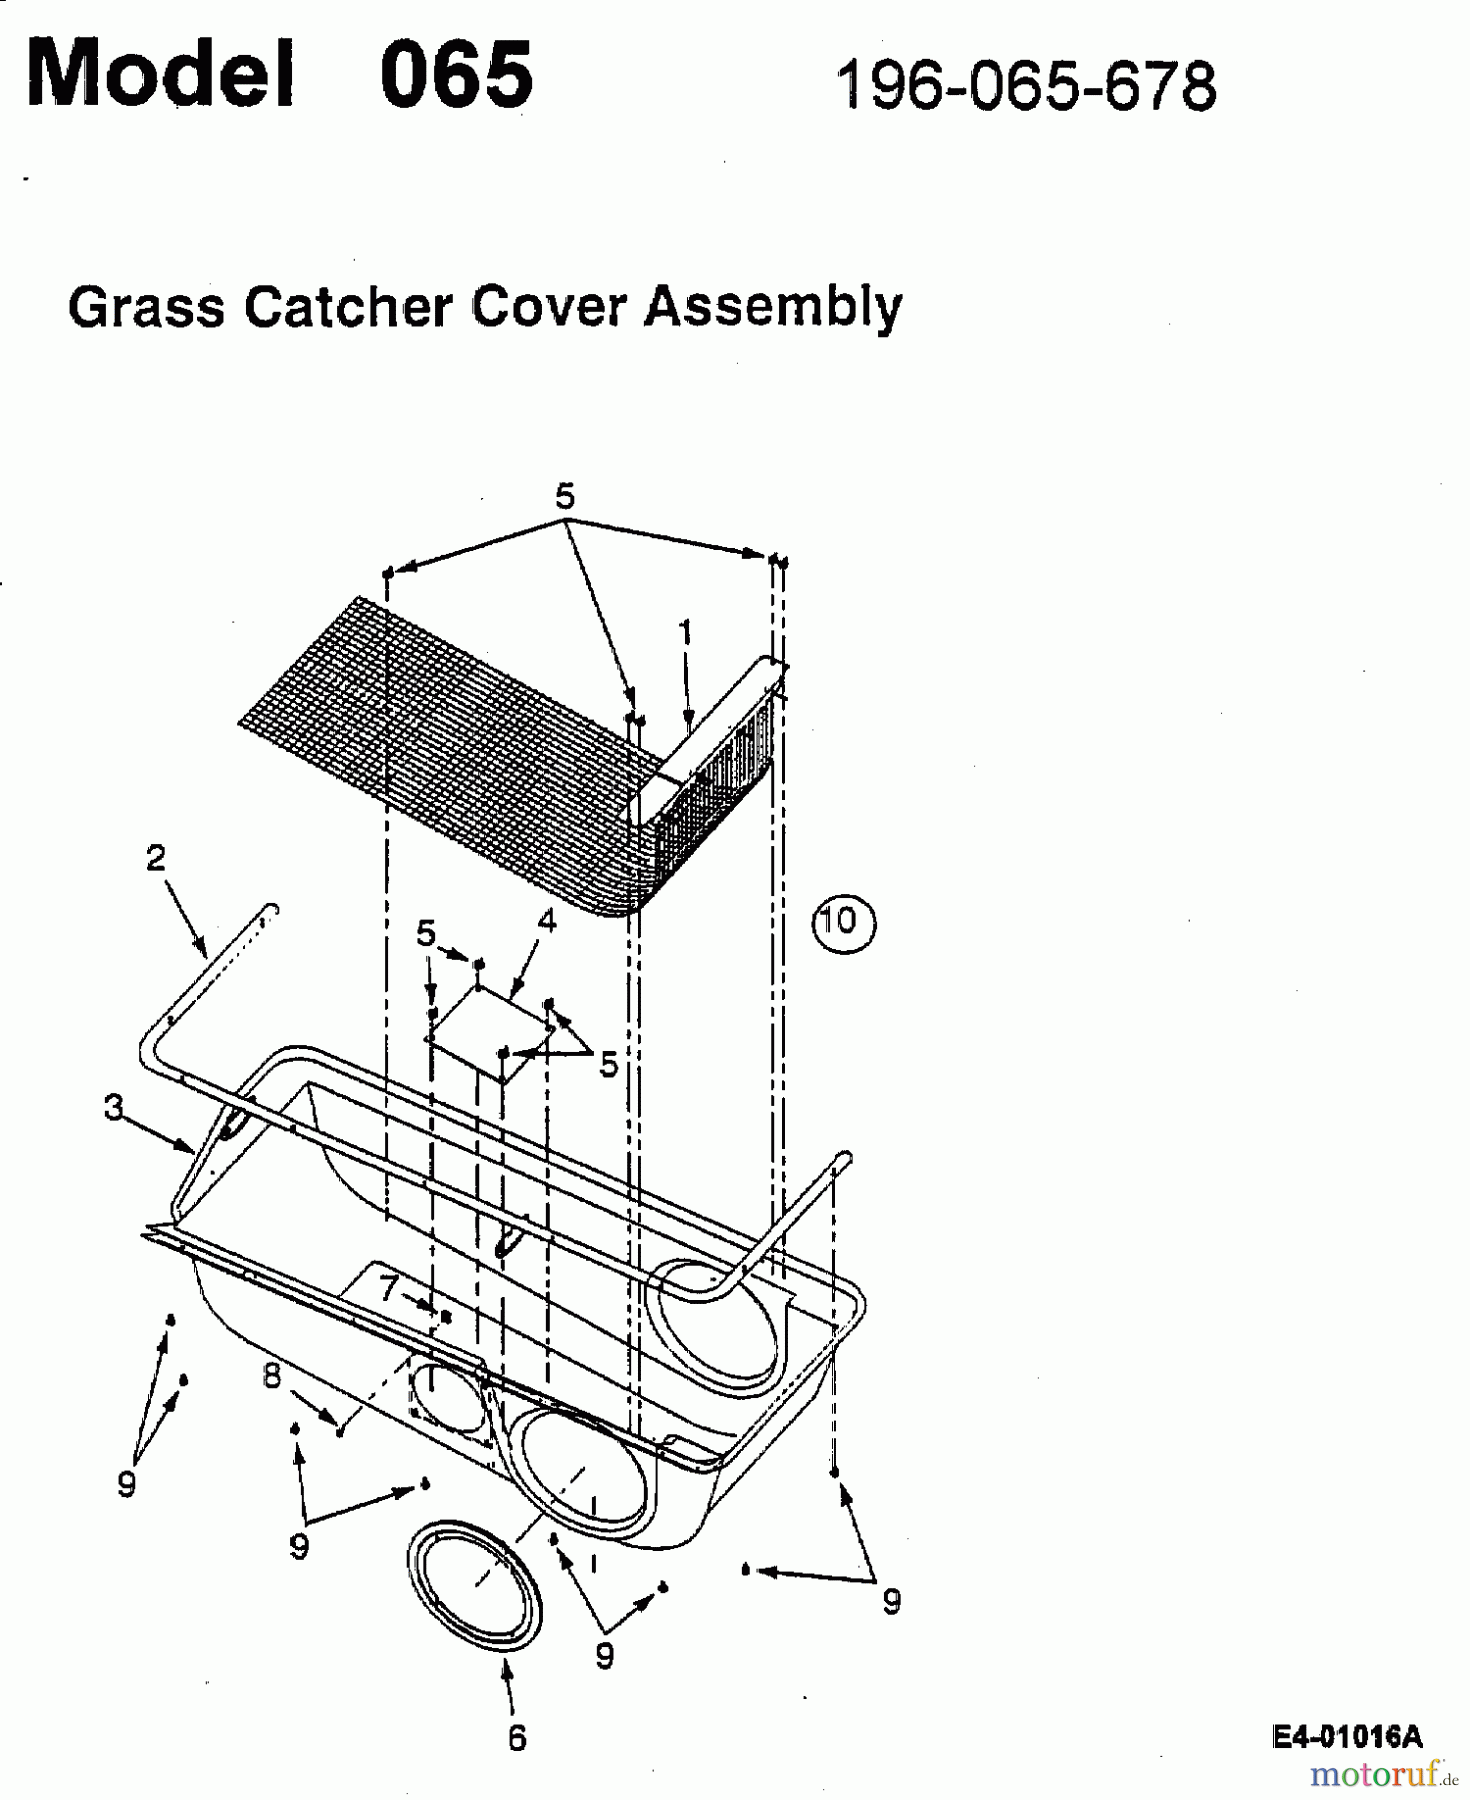  MTD Accessories Accessories garden and lawn tractors Grass catcher for 400 series 190-065-678  (2001) Cover grass bag